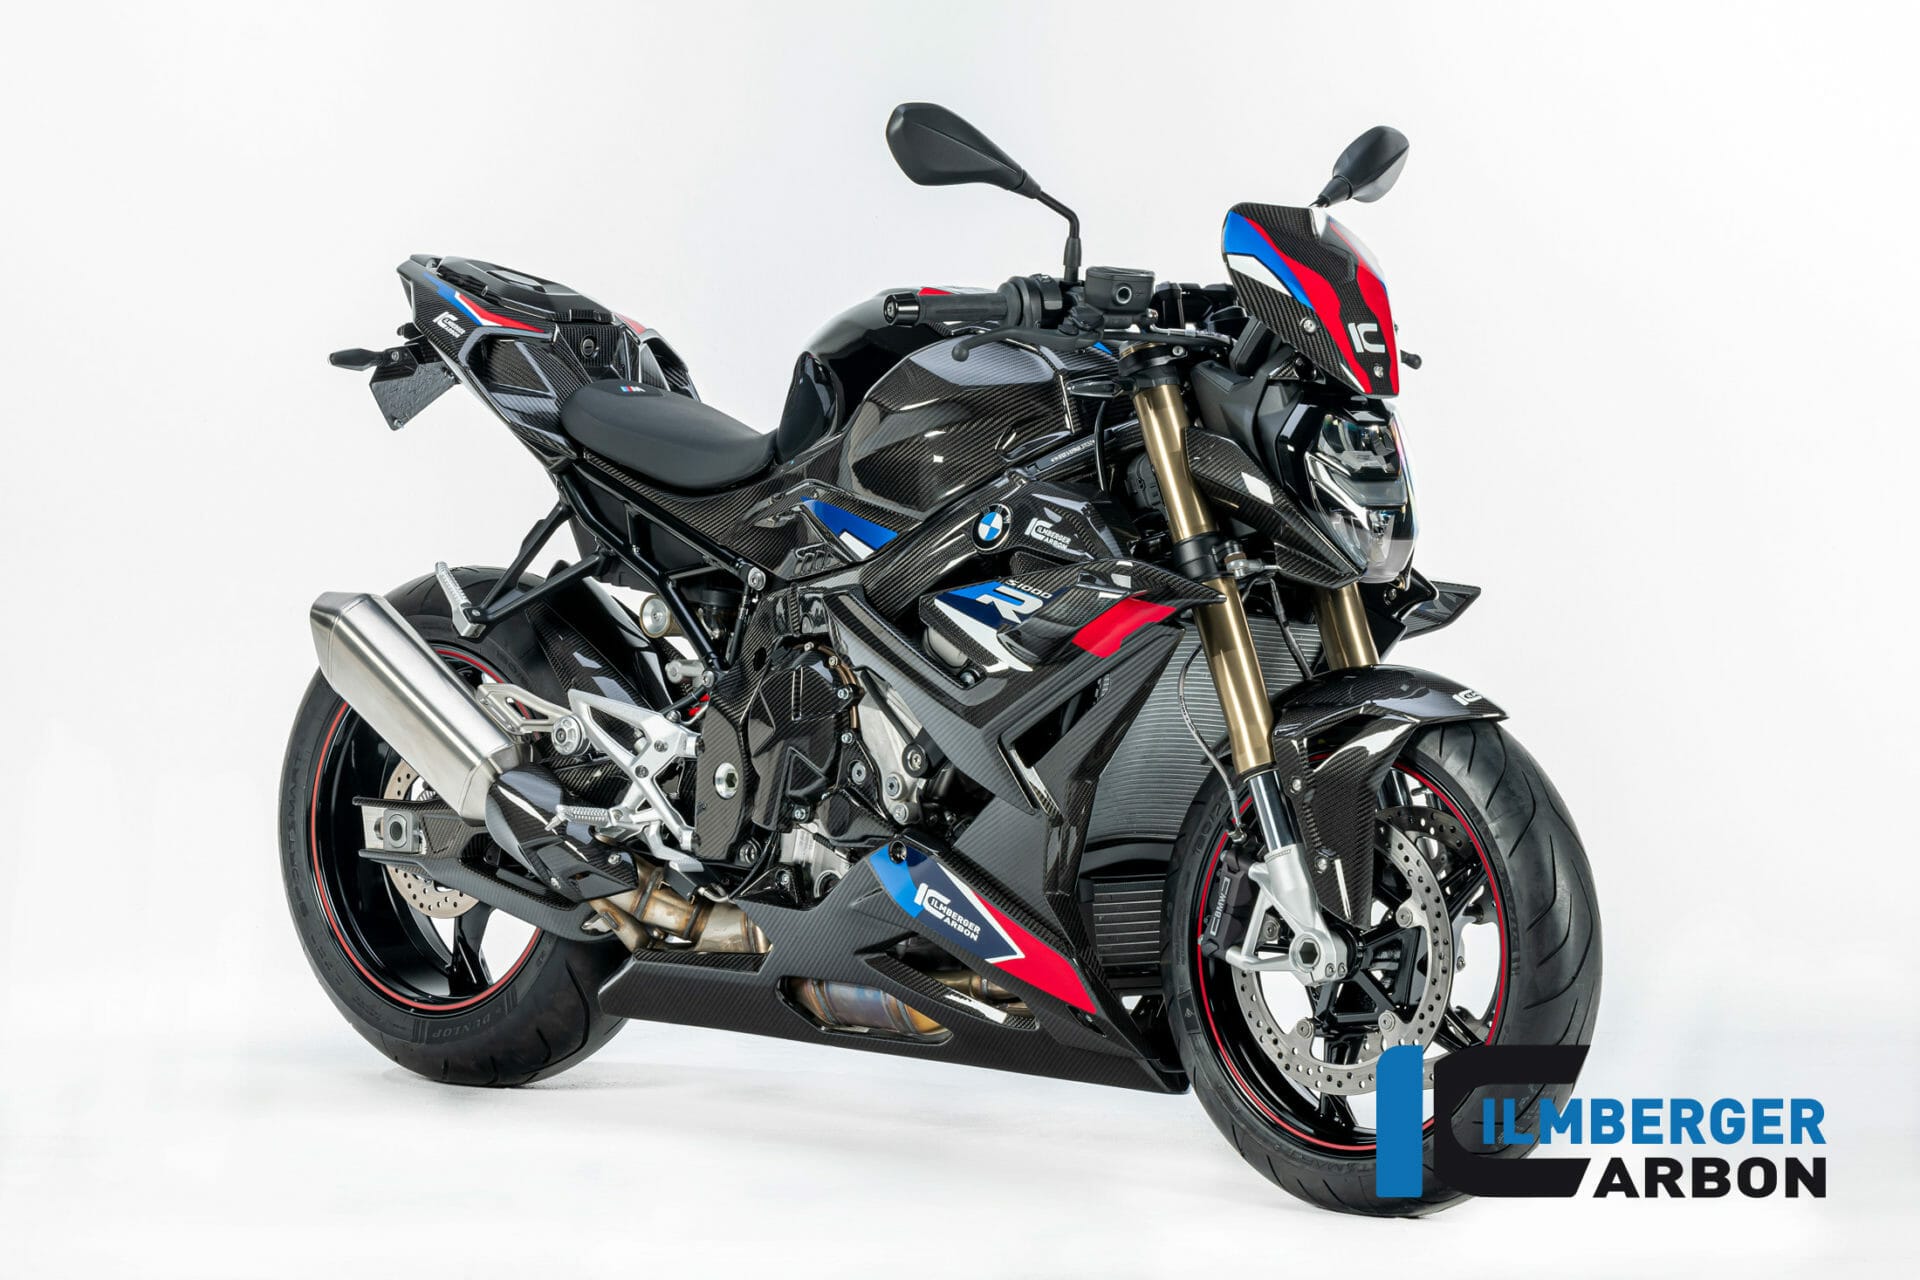 Ilmberger Carbonparts for the BMW S 1000 R
- also in the MOTORCYCLES.NEWS APP